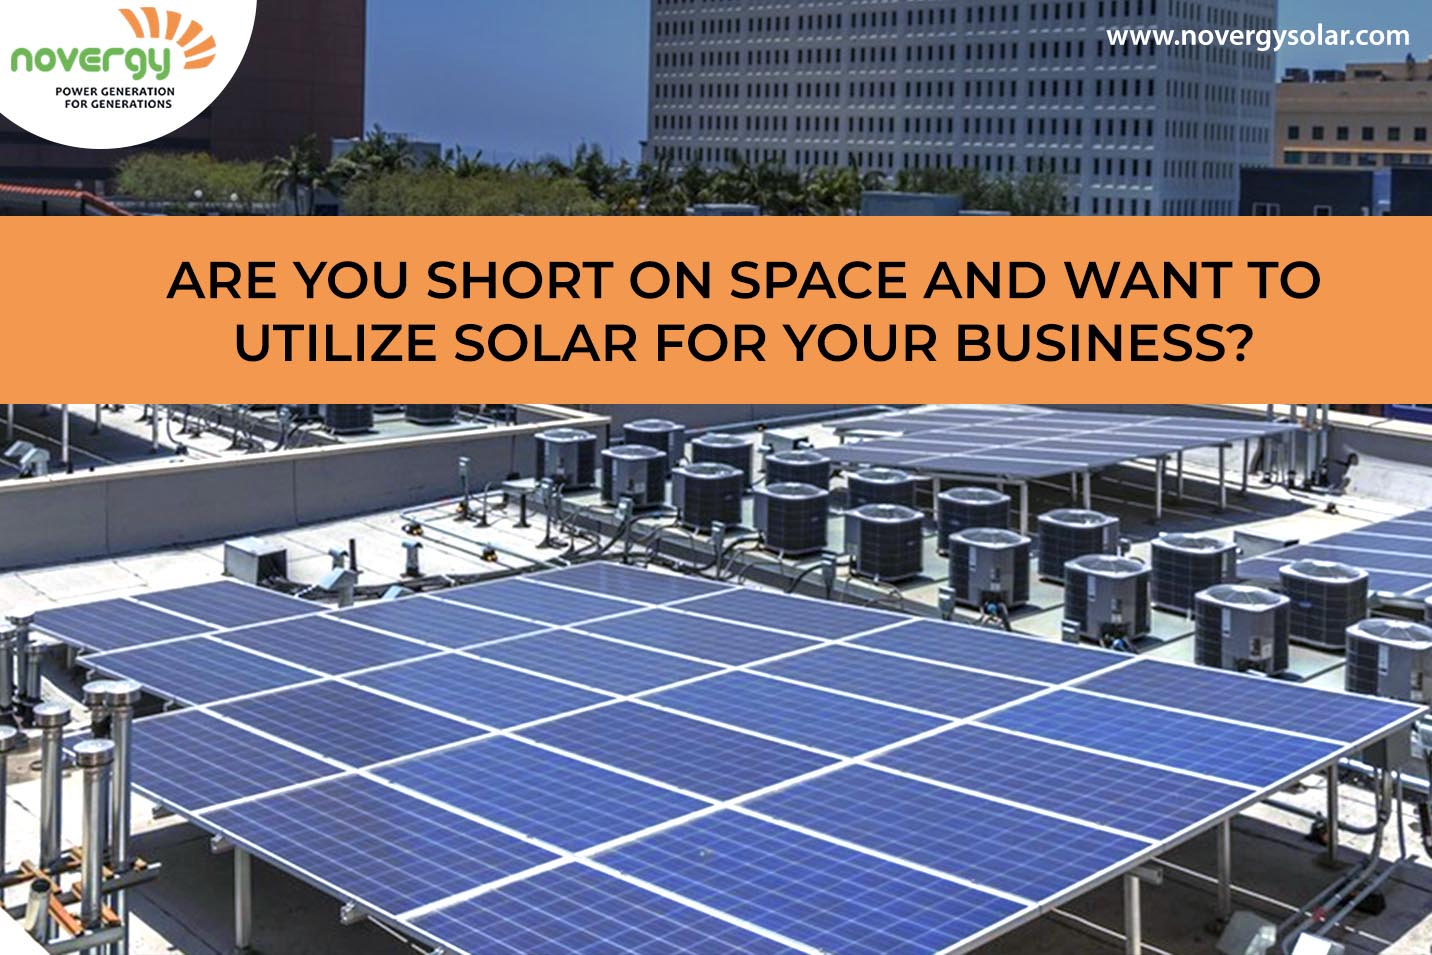 most efficient solar panels for small business